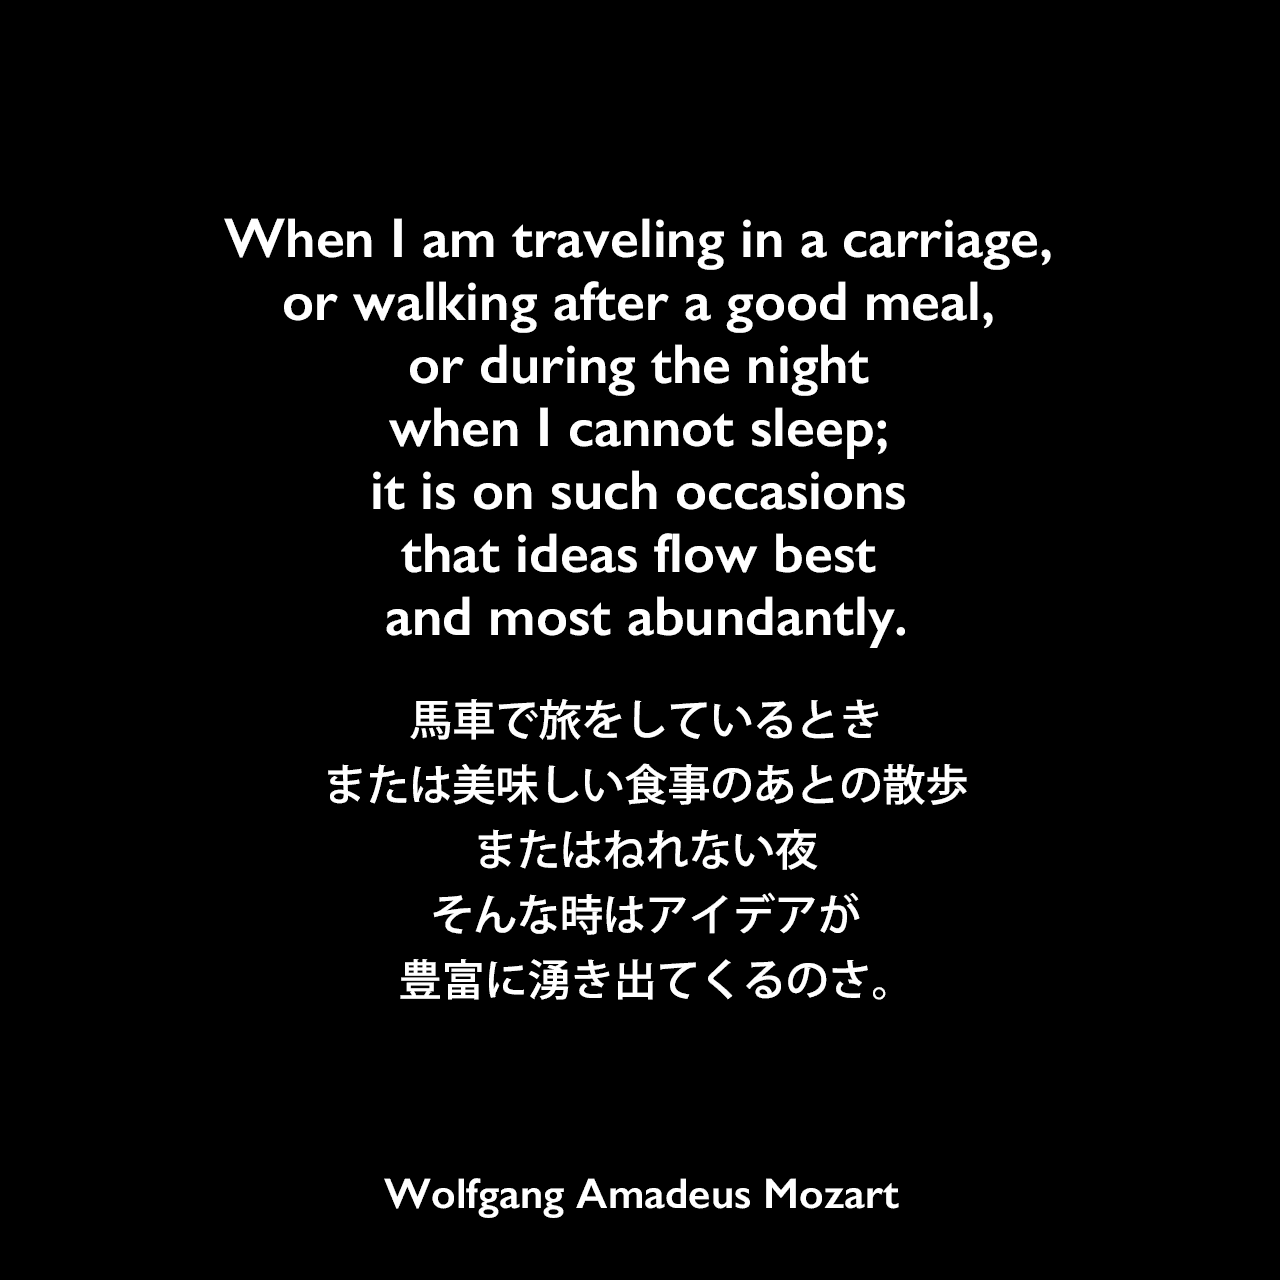 When I am traveling in a carriage, or walking after a good meal, or during the night when I cannot sleep; it is on such occasions that ideas flow best and most abundantly.馬車で旅をしているとき、または美味しい食事のあとの散歩、またはねれない夜、そんな時はアイデアが豊富に湧き出てくるのさ。Wolfgang Amadeus Mozart